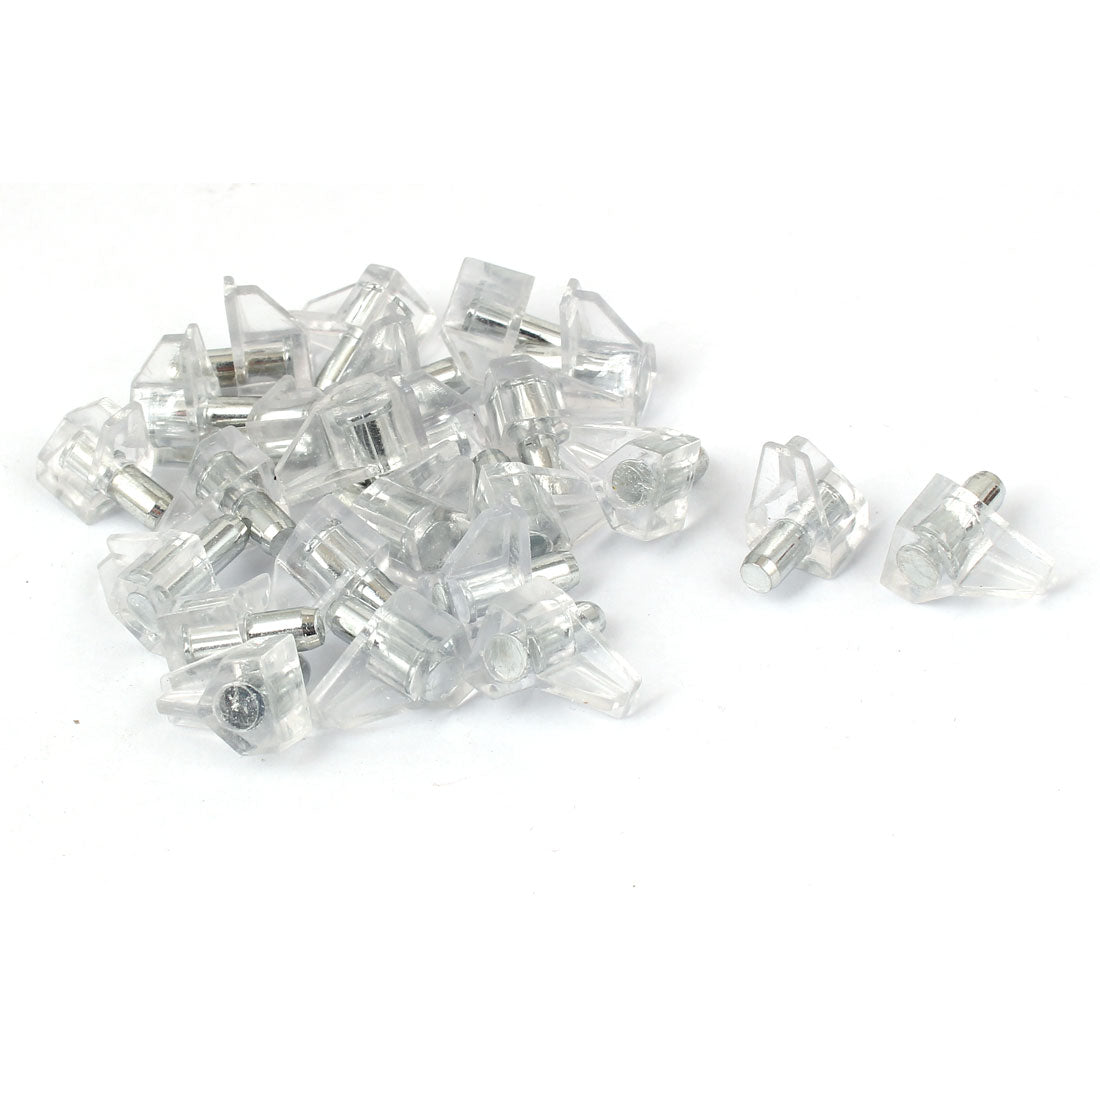 Uxcell Uxcell 5mm Dia Support Peg Stud Pin for Kitchen Cupboard Cabinet 30 Pcs